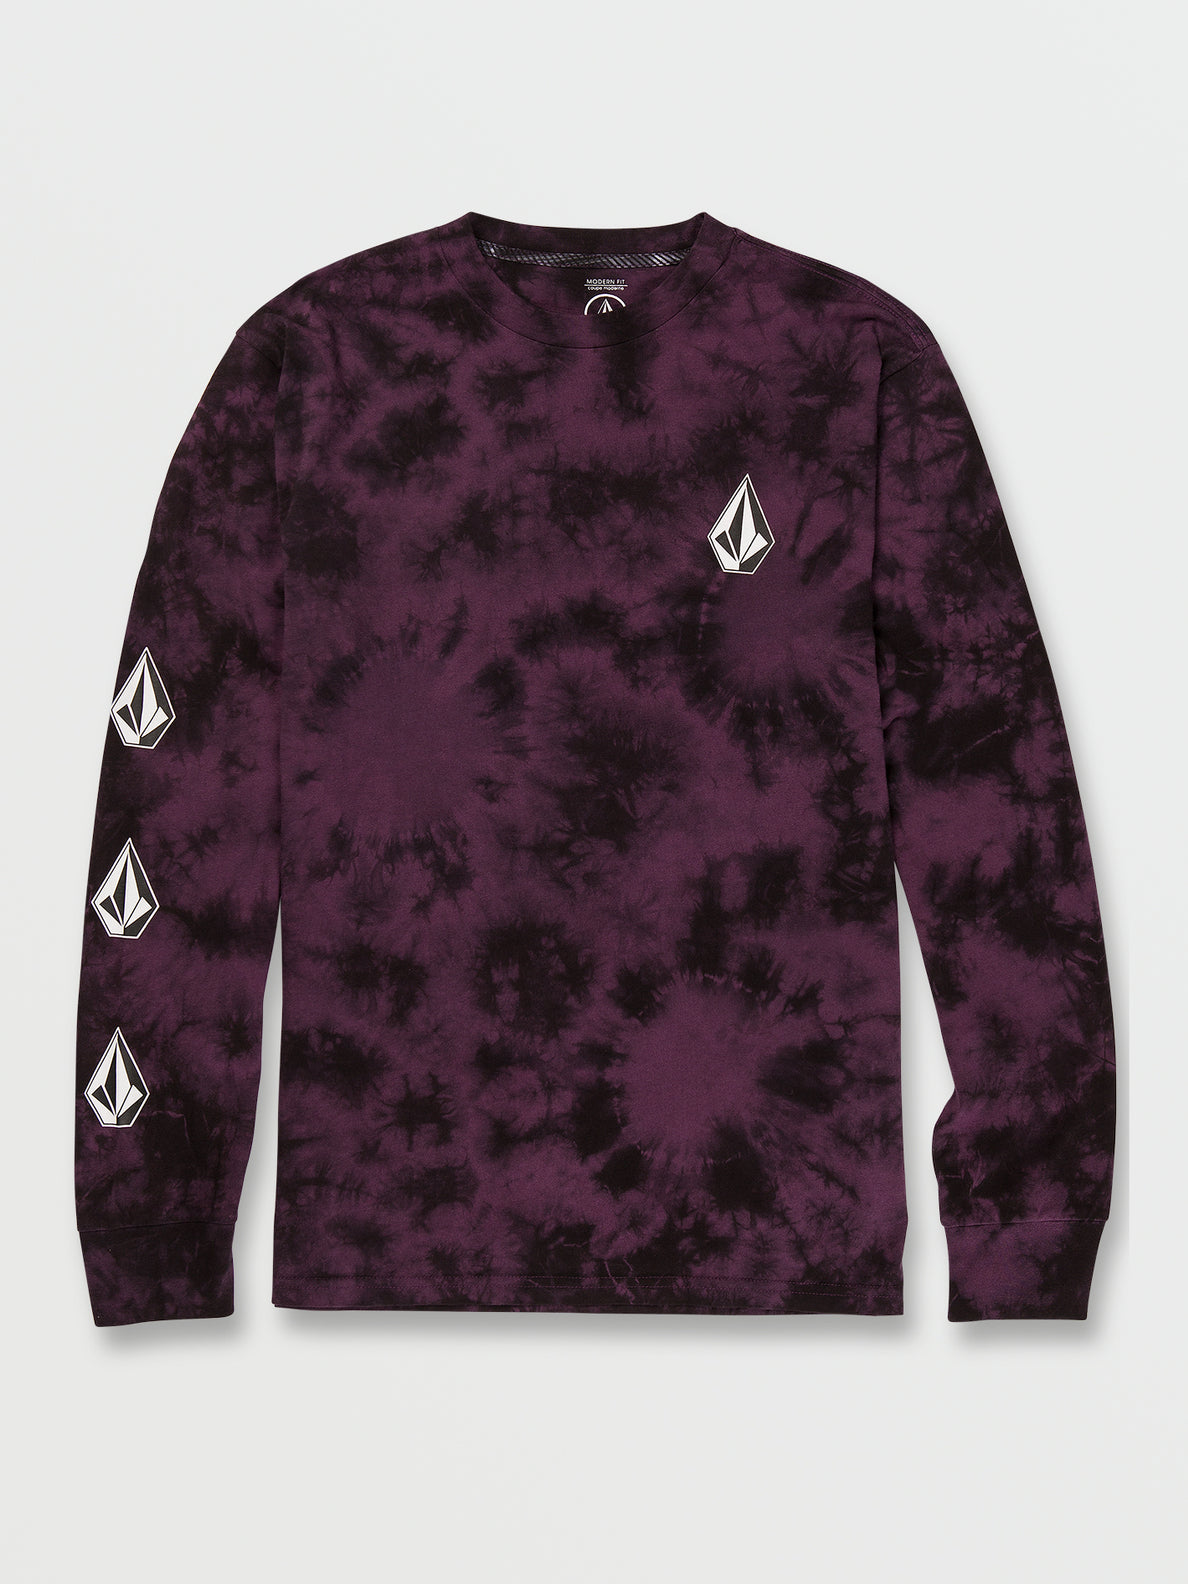 Iconic Stone Dye Long Sleeve Tee - Mulberry (A3632201_MUL) [F]